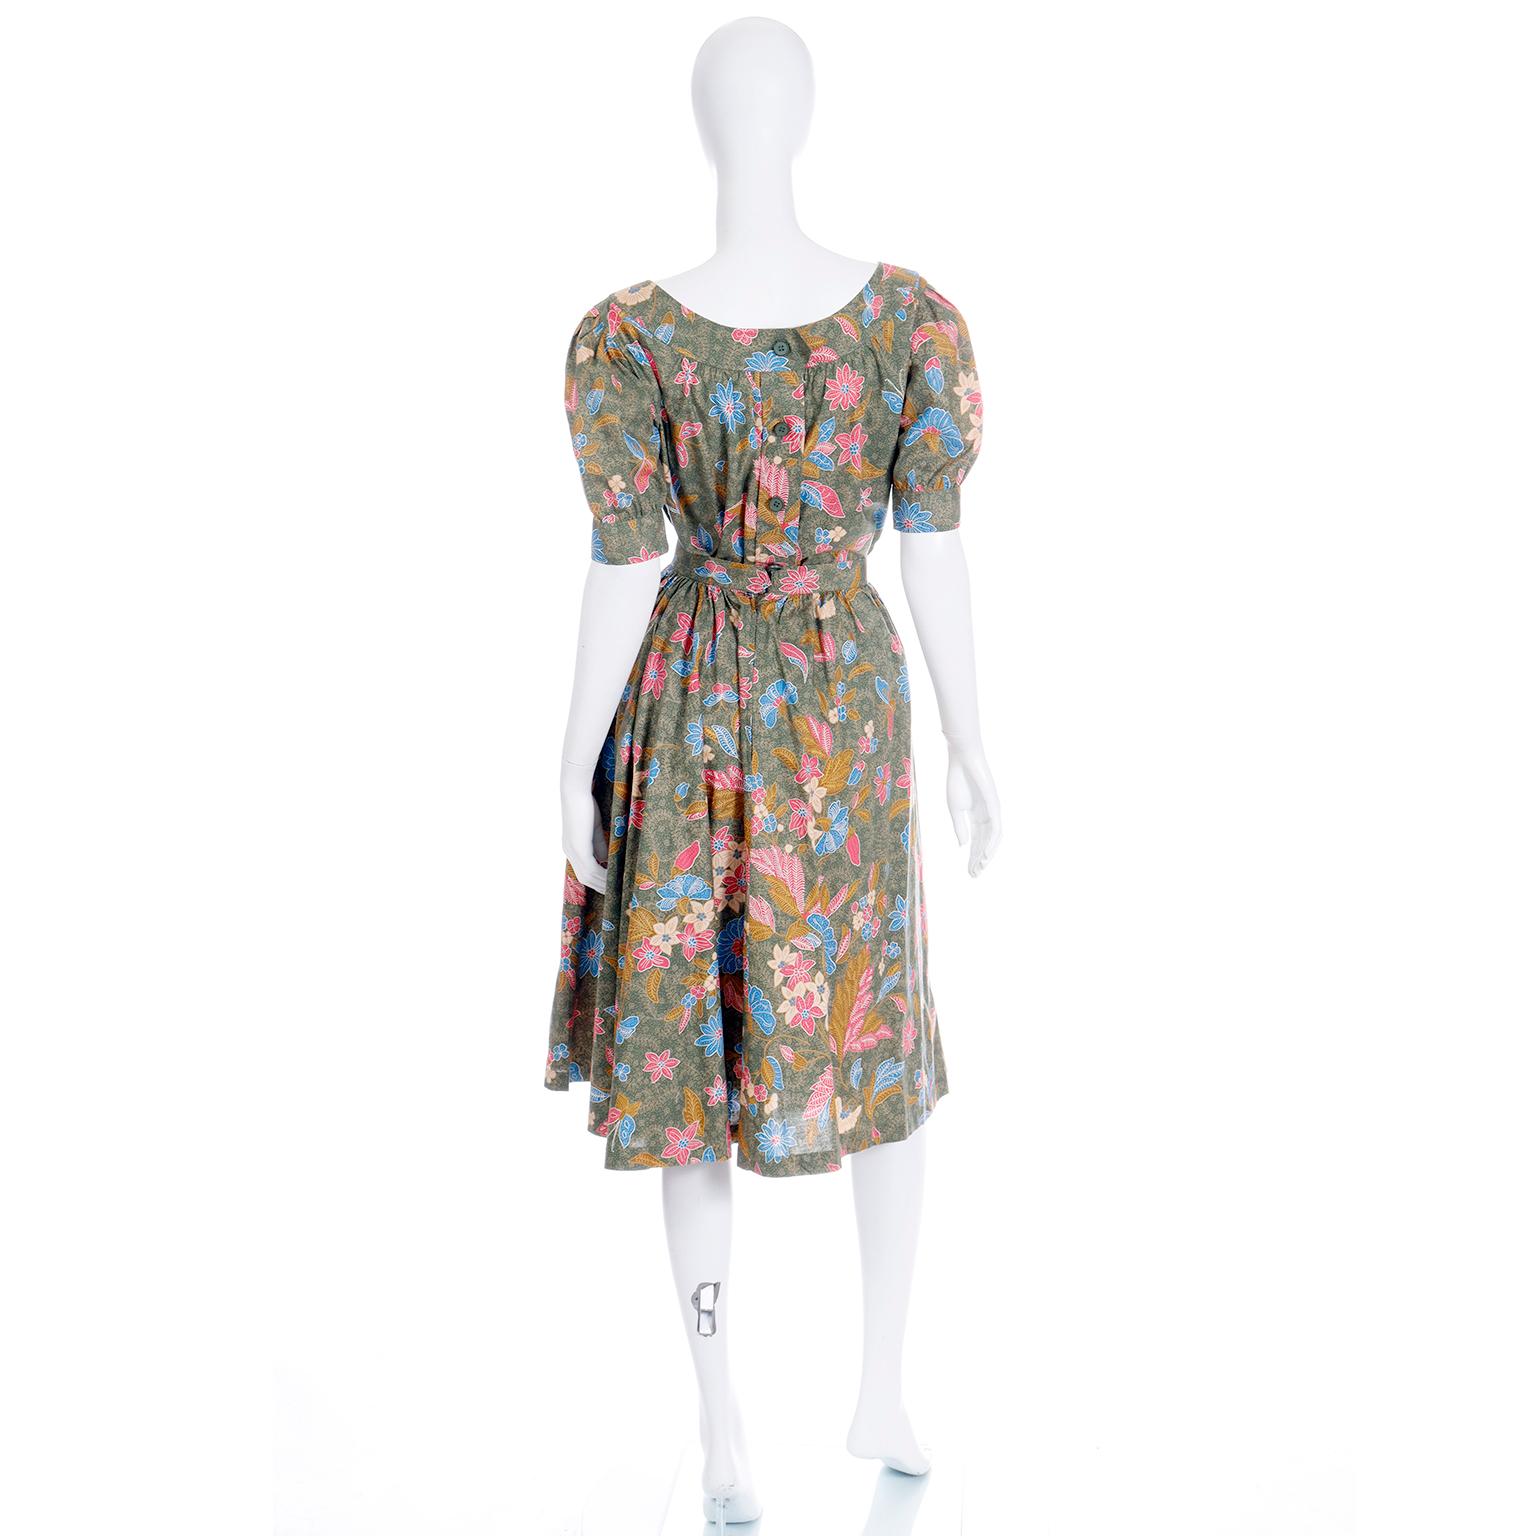 S/S 1986 Yves Saint Laurent Vintage YSL Botanical Blouse & Skirt 2 Pc Dress In Excellent Condition For Sale In Portland, OR